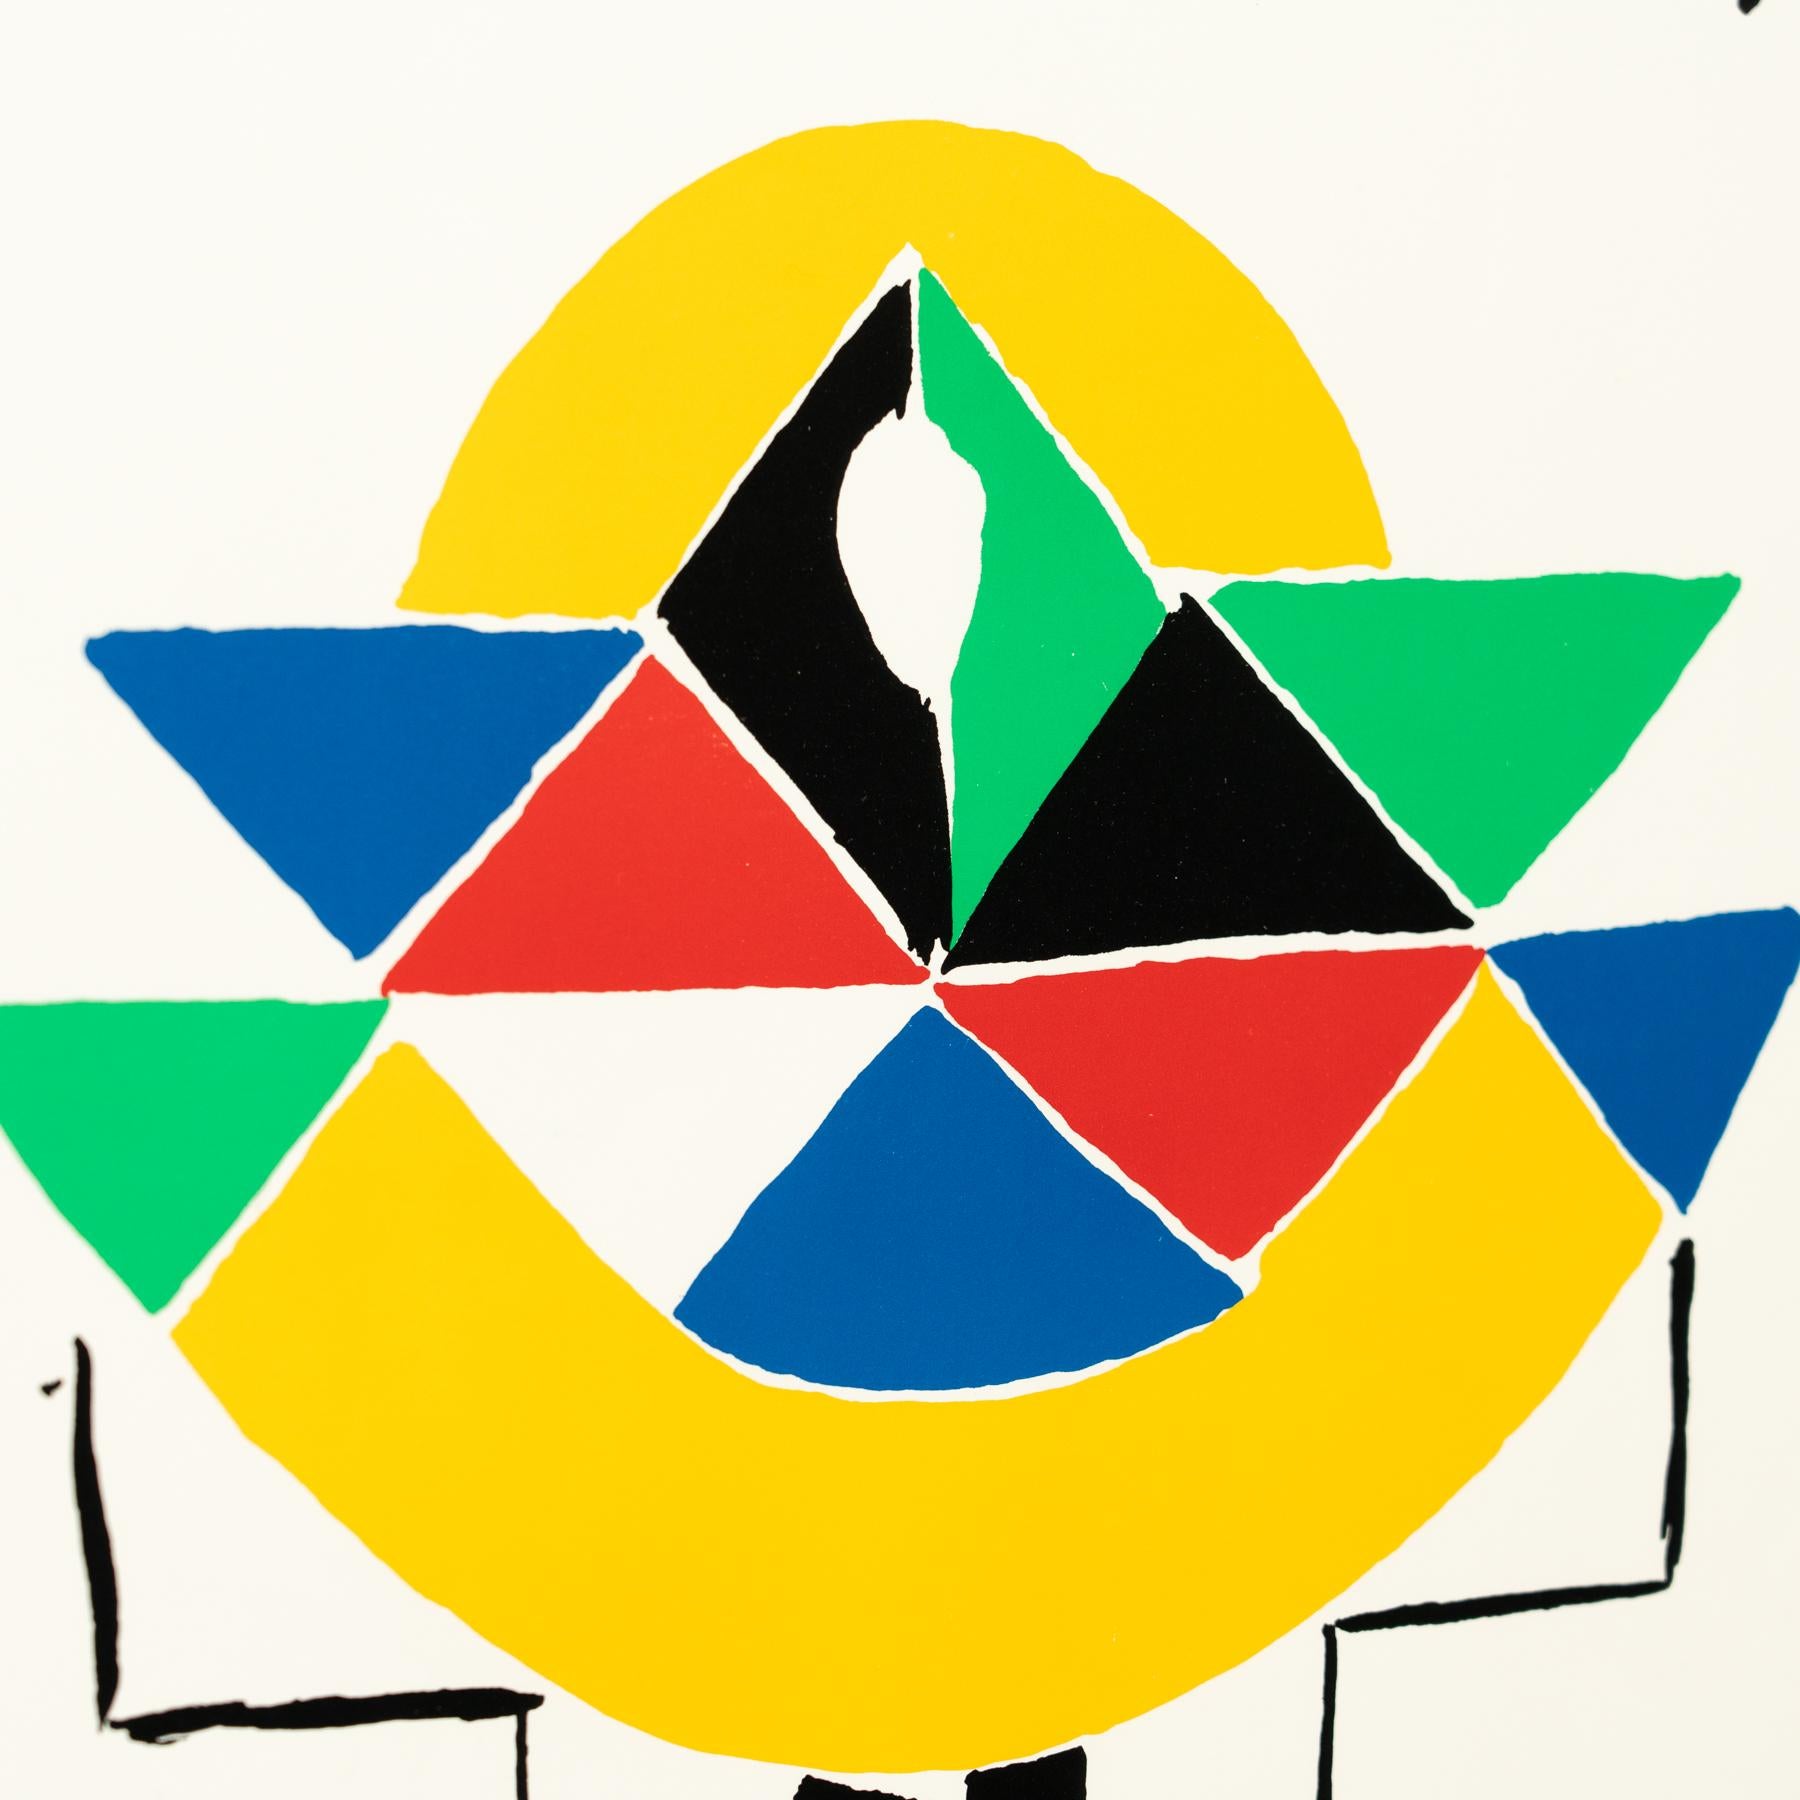 Framed Sonia Delaunay Lithography In Good Condition For Sale In Barcelona, Barcelona